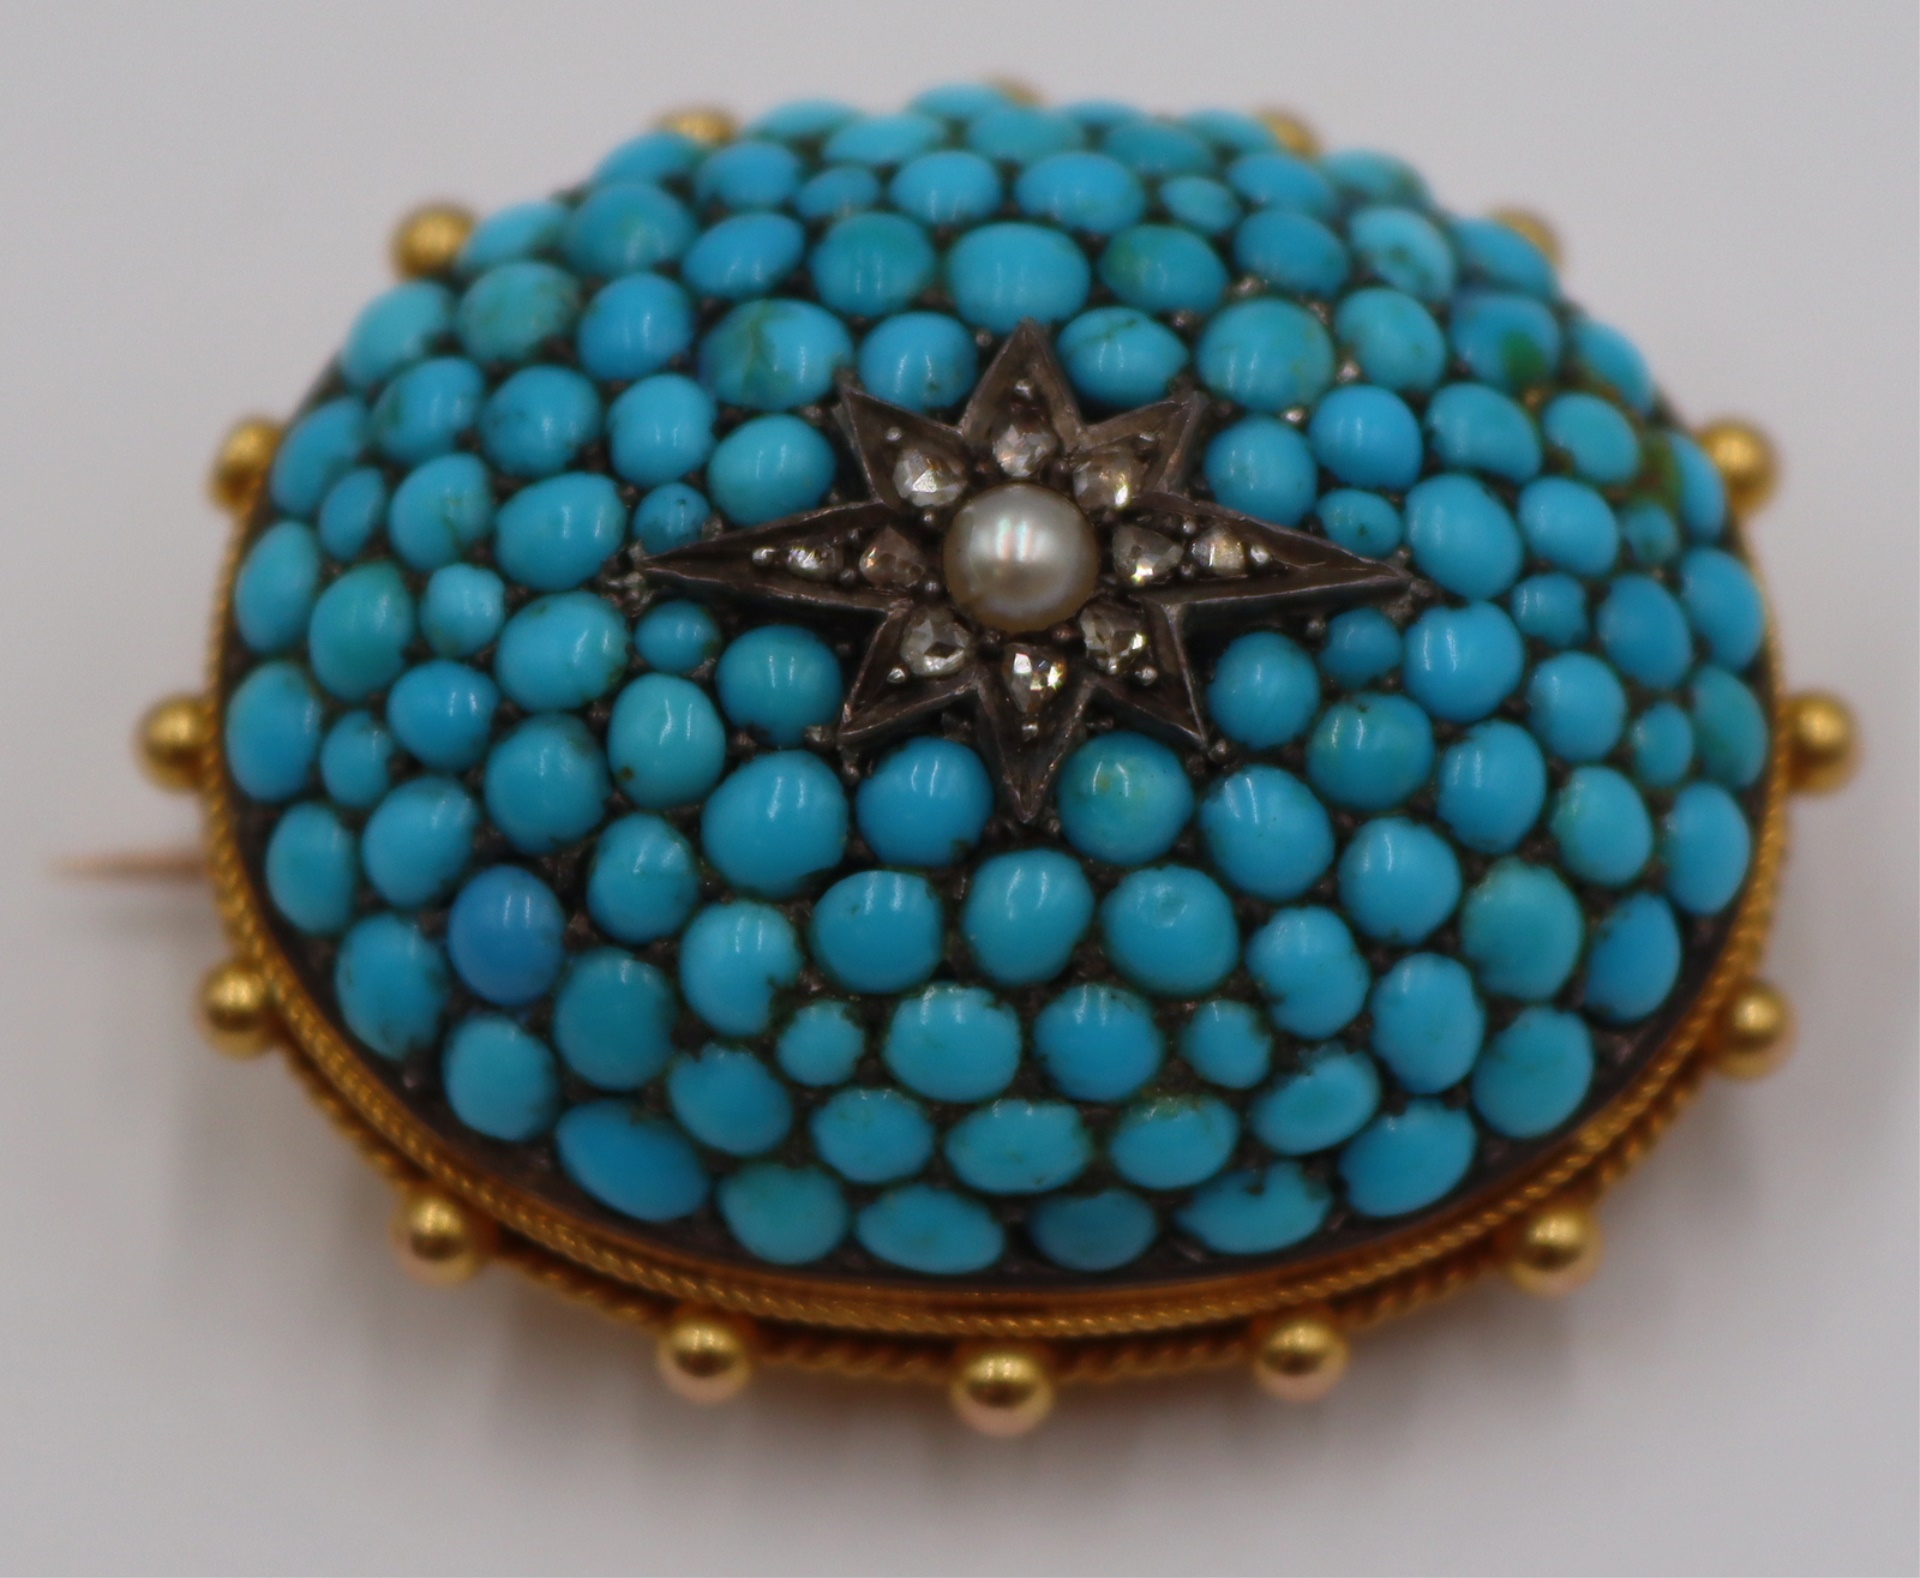 JEWELRY. VICTORIAN 14KT GOLD TURQUOISE